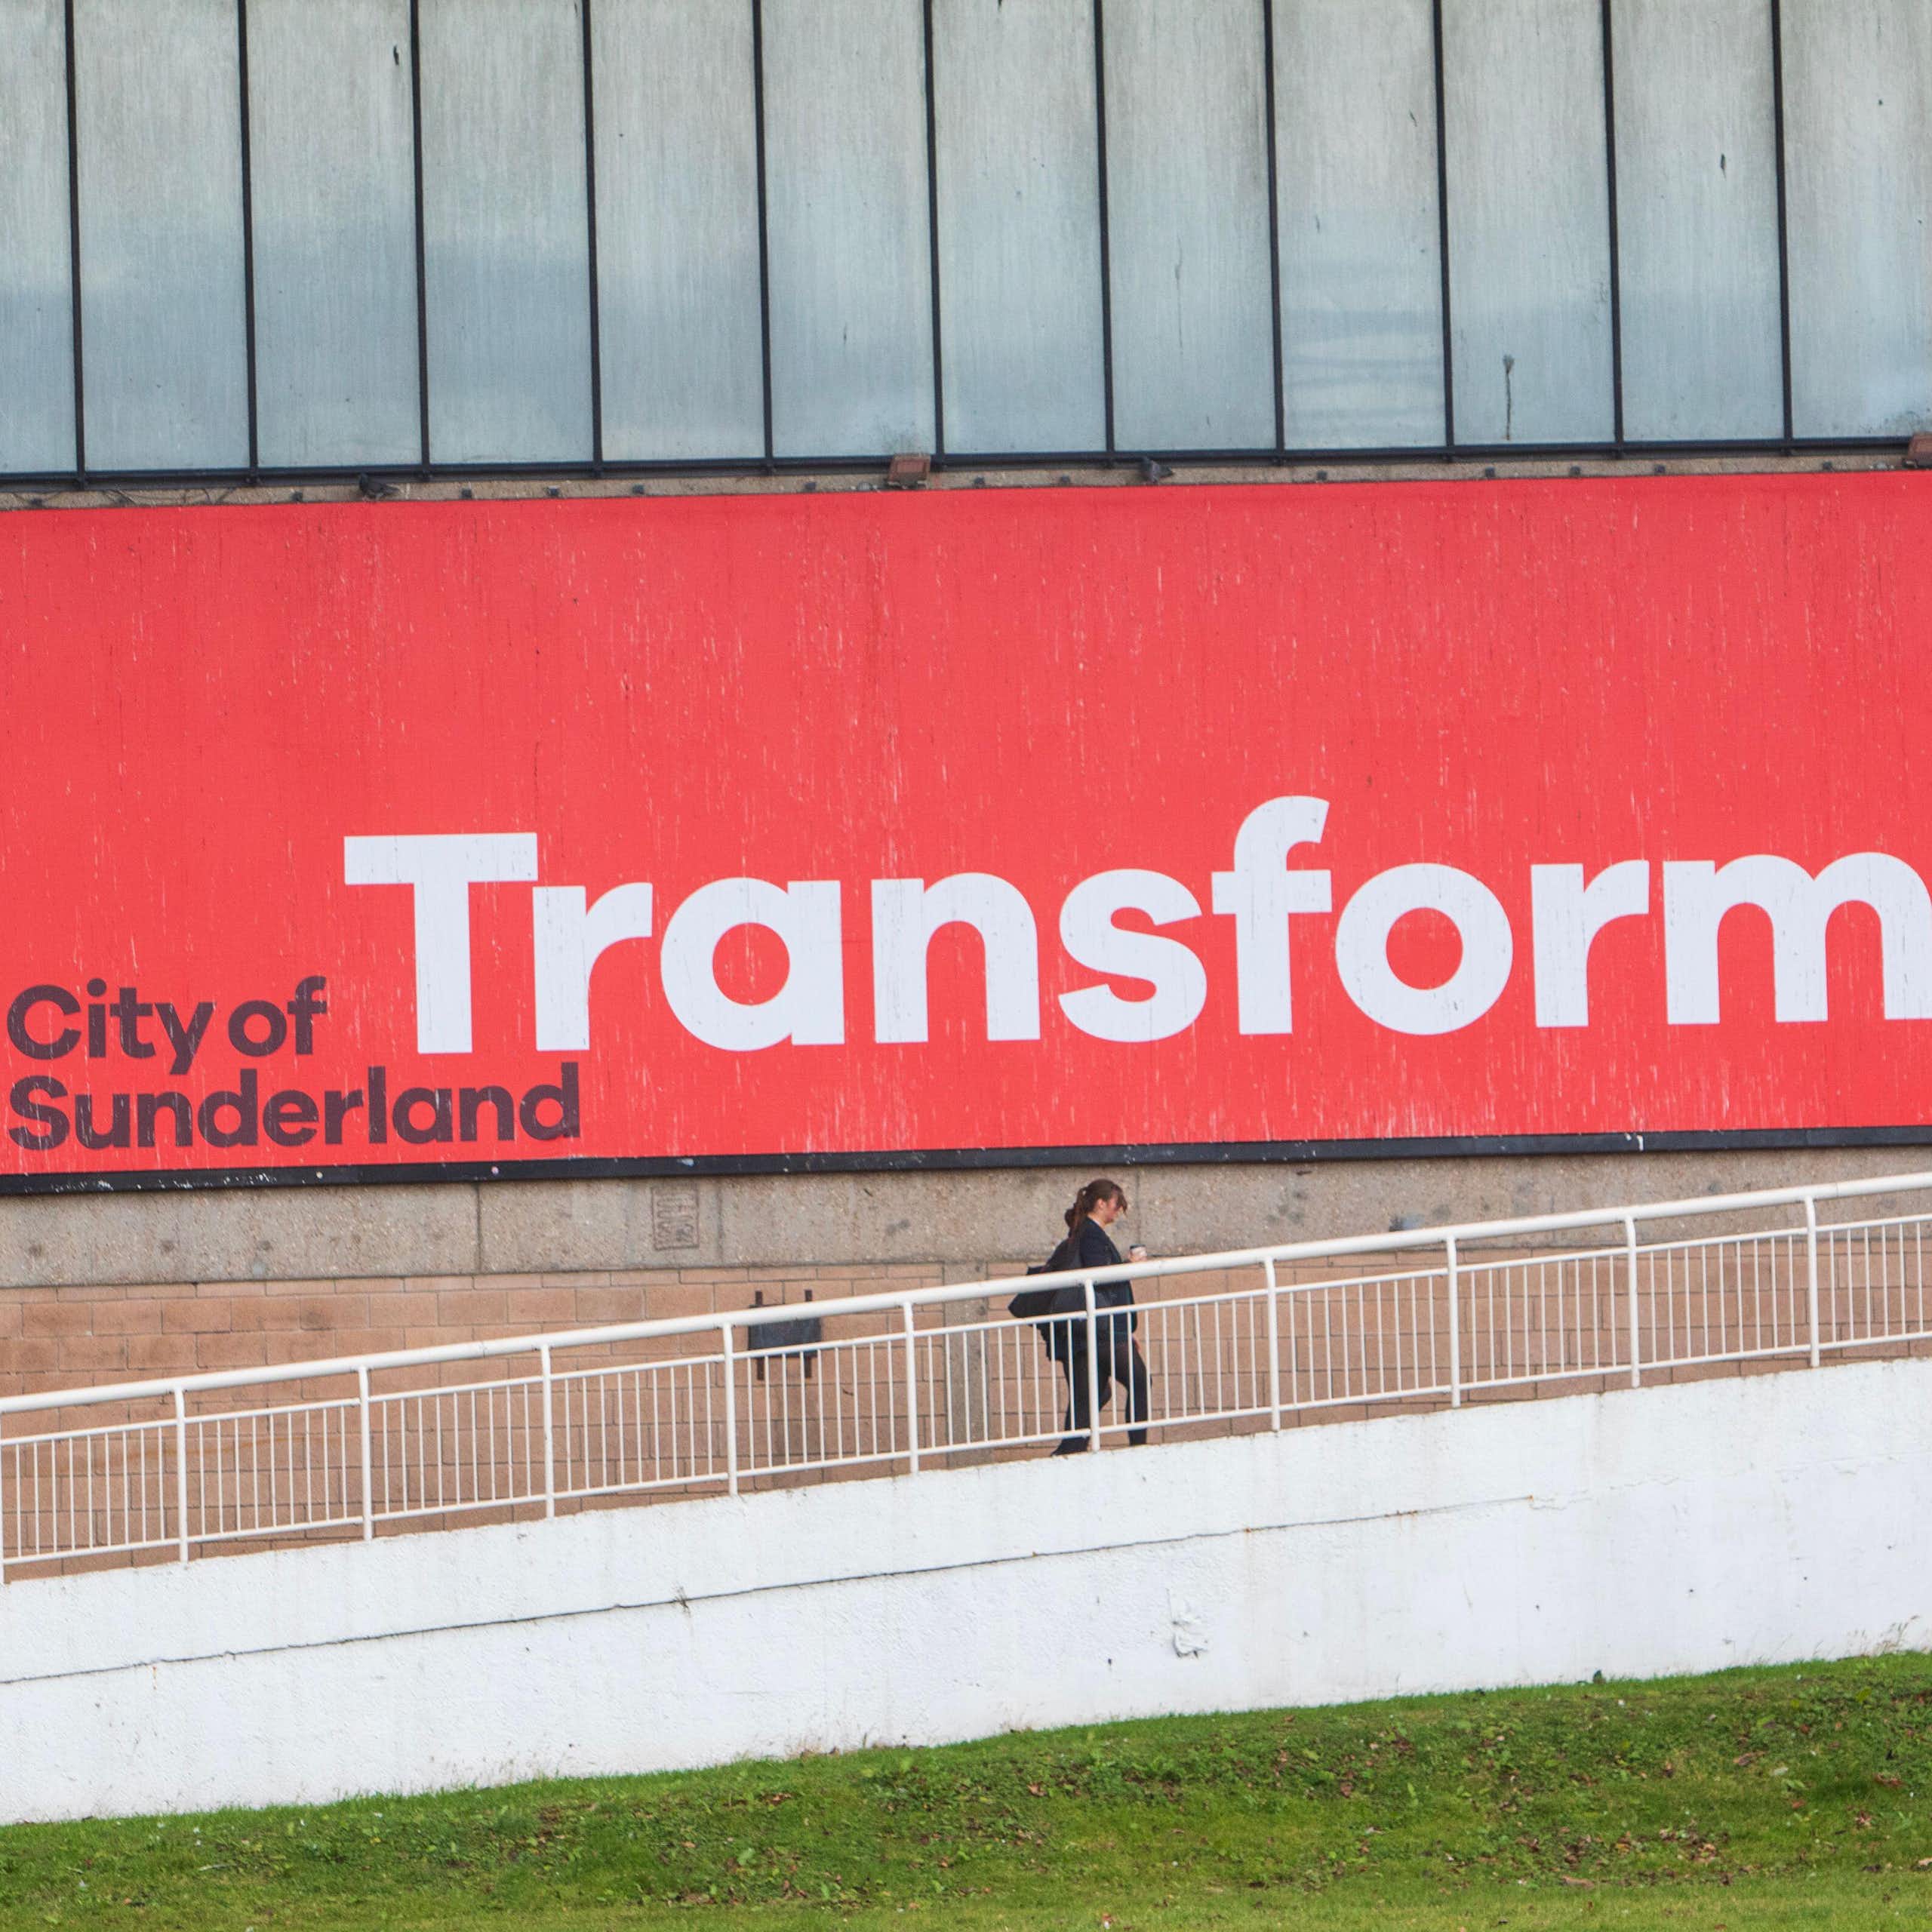 Person walking up stairs in front of a large advert for the city of Sunderland.